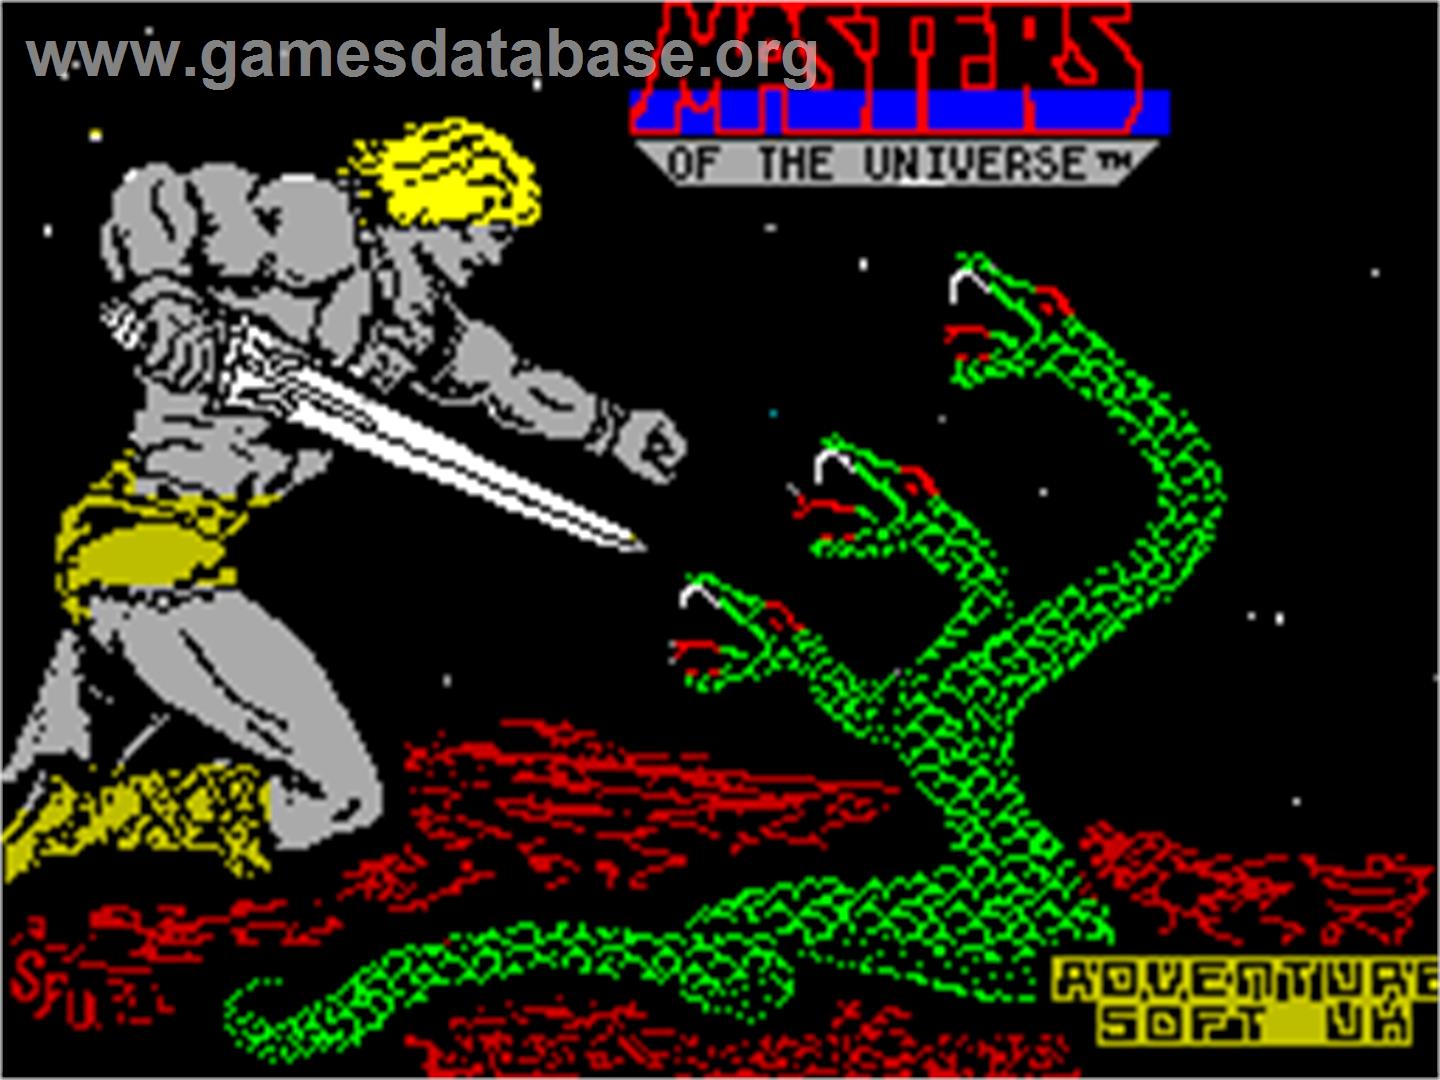 Masters of the Universe: The Arcade Game - Sinclair ZX Spectrum - Artwork - Title Screen